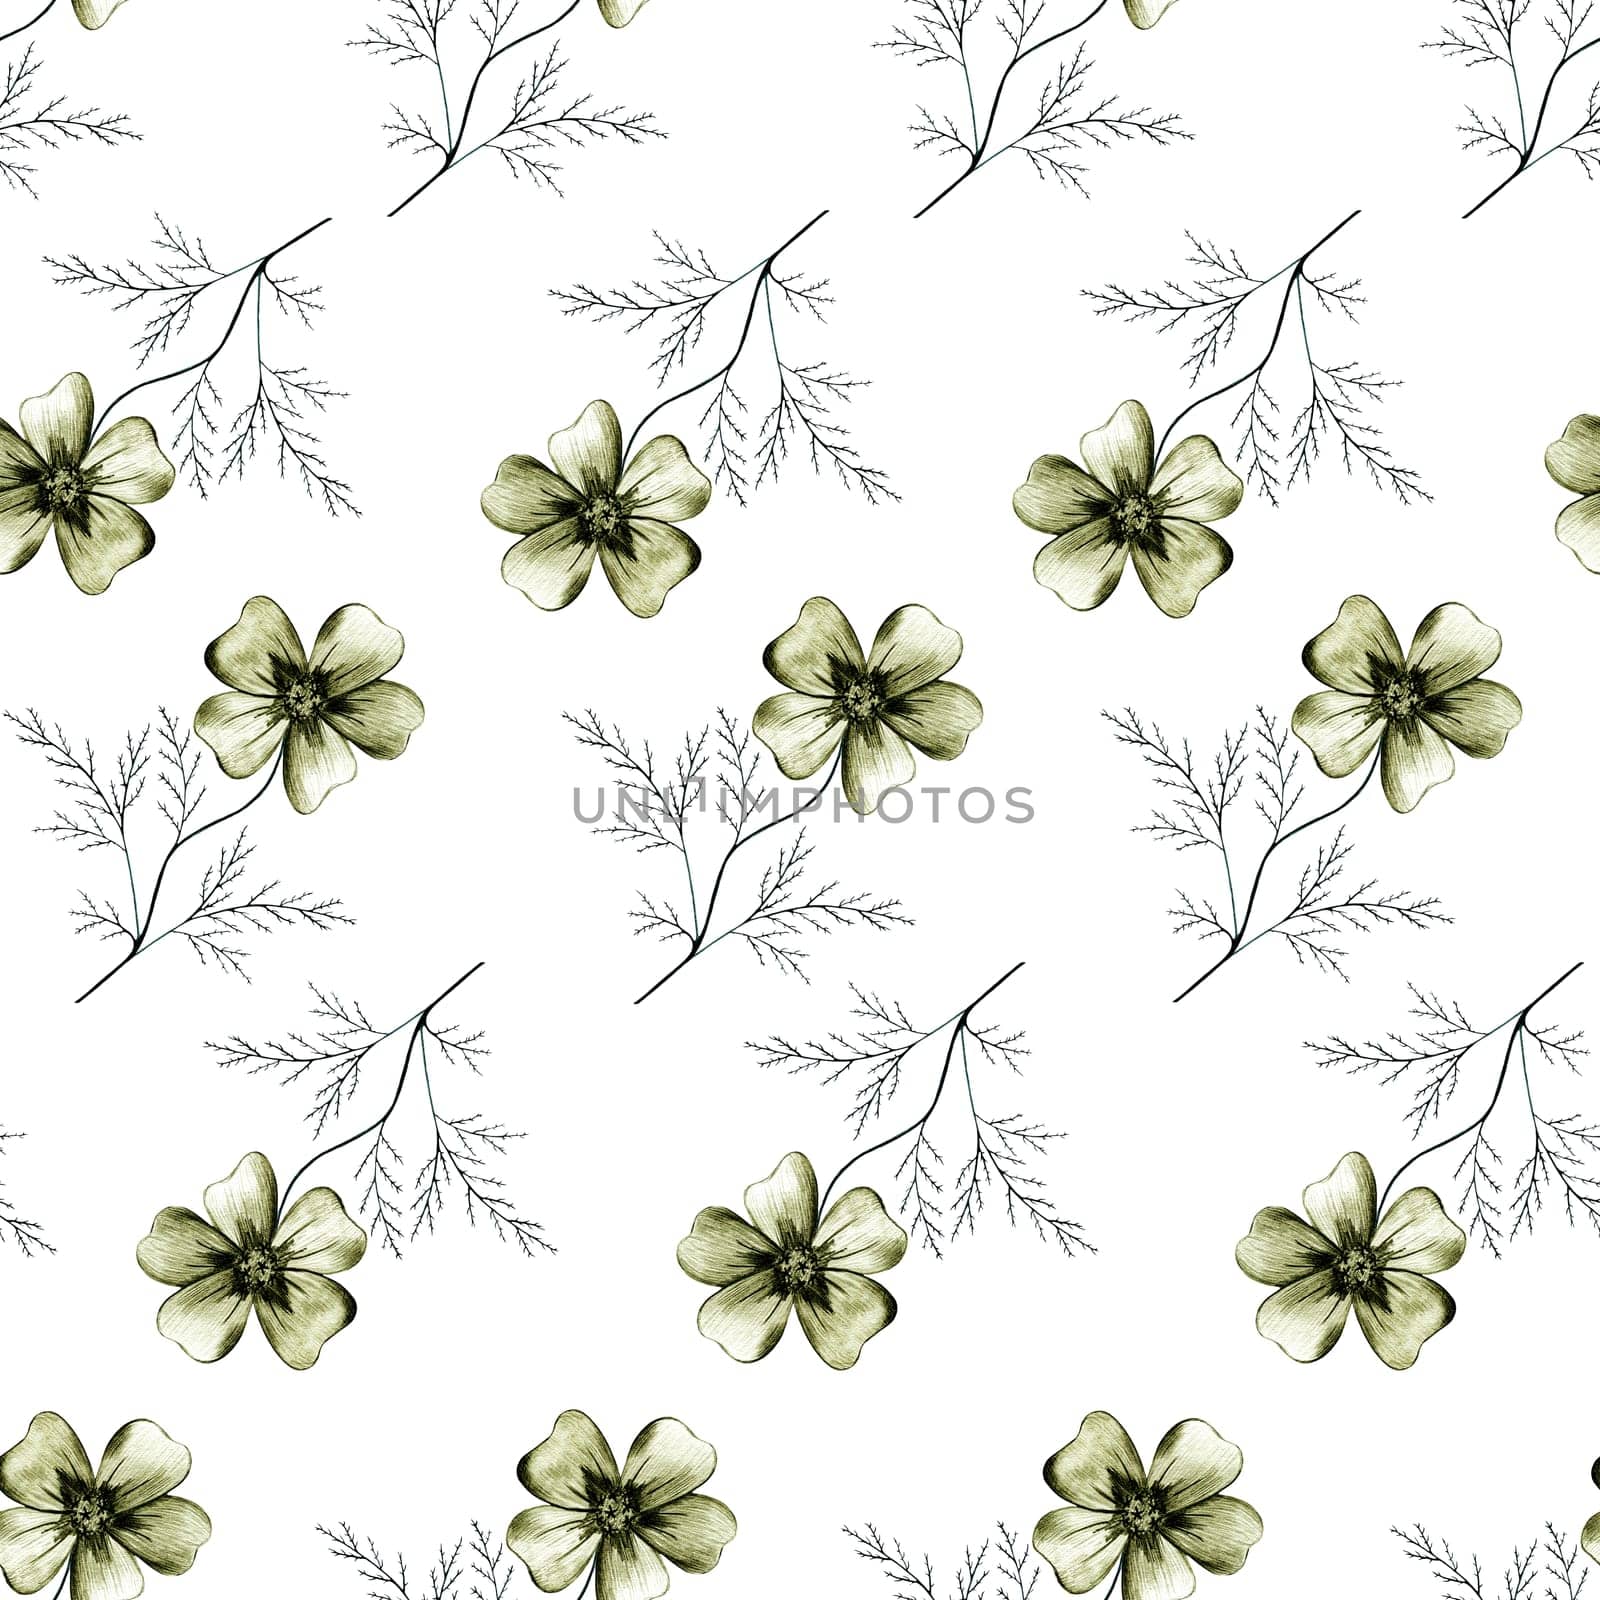 Seamless Pattern with Hand-Drawn Yellow Flower. White Background with Thin-leaved Yellow Marigolds for Print, Design, Holiday, Wedding and Birthday Card.